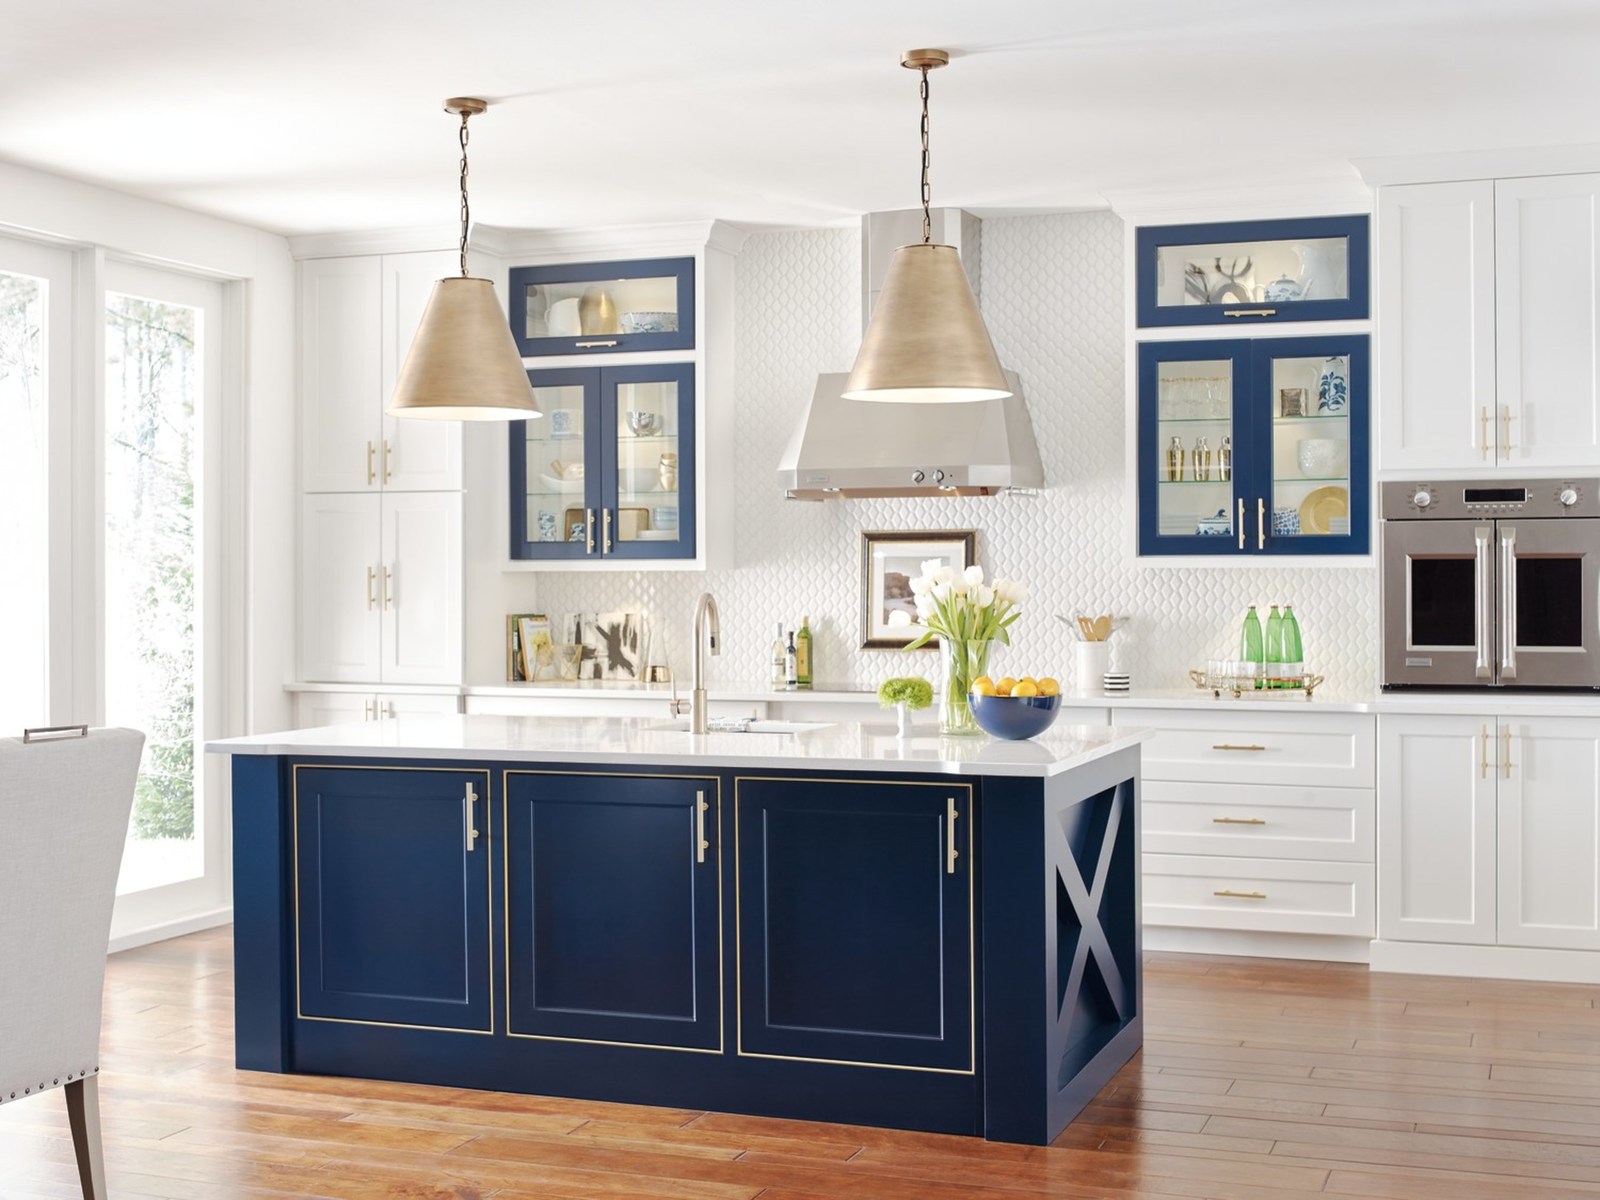 Wellborn Cabinet Inc Adds New Finish Options Woodworking Network